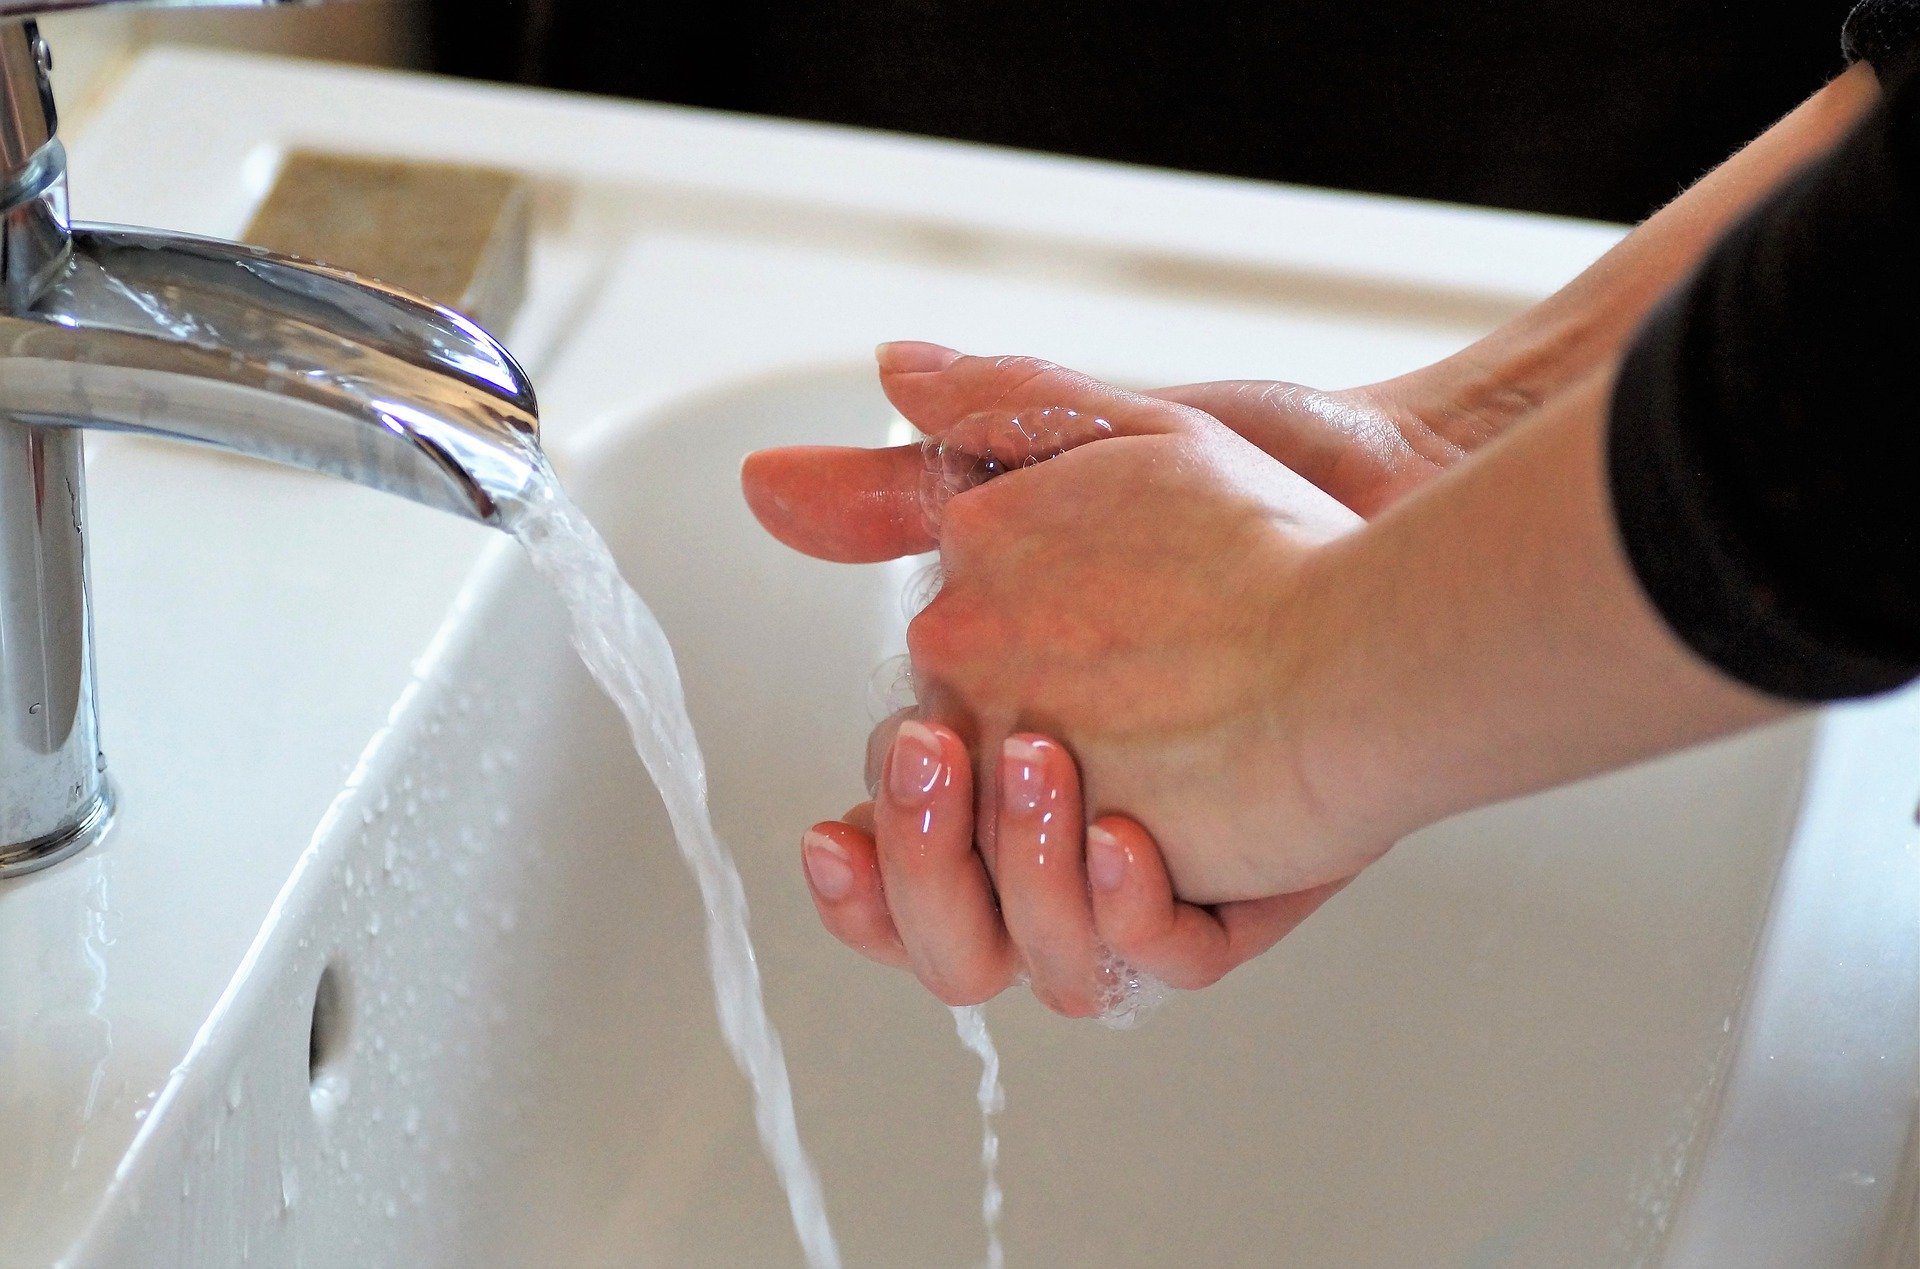 Best Soap for Dry Skin from Overwashing - Including How to Wash your Hands